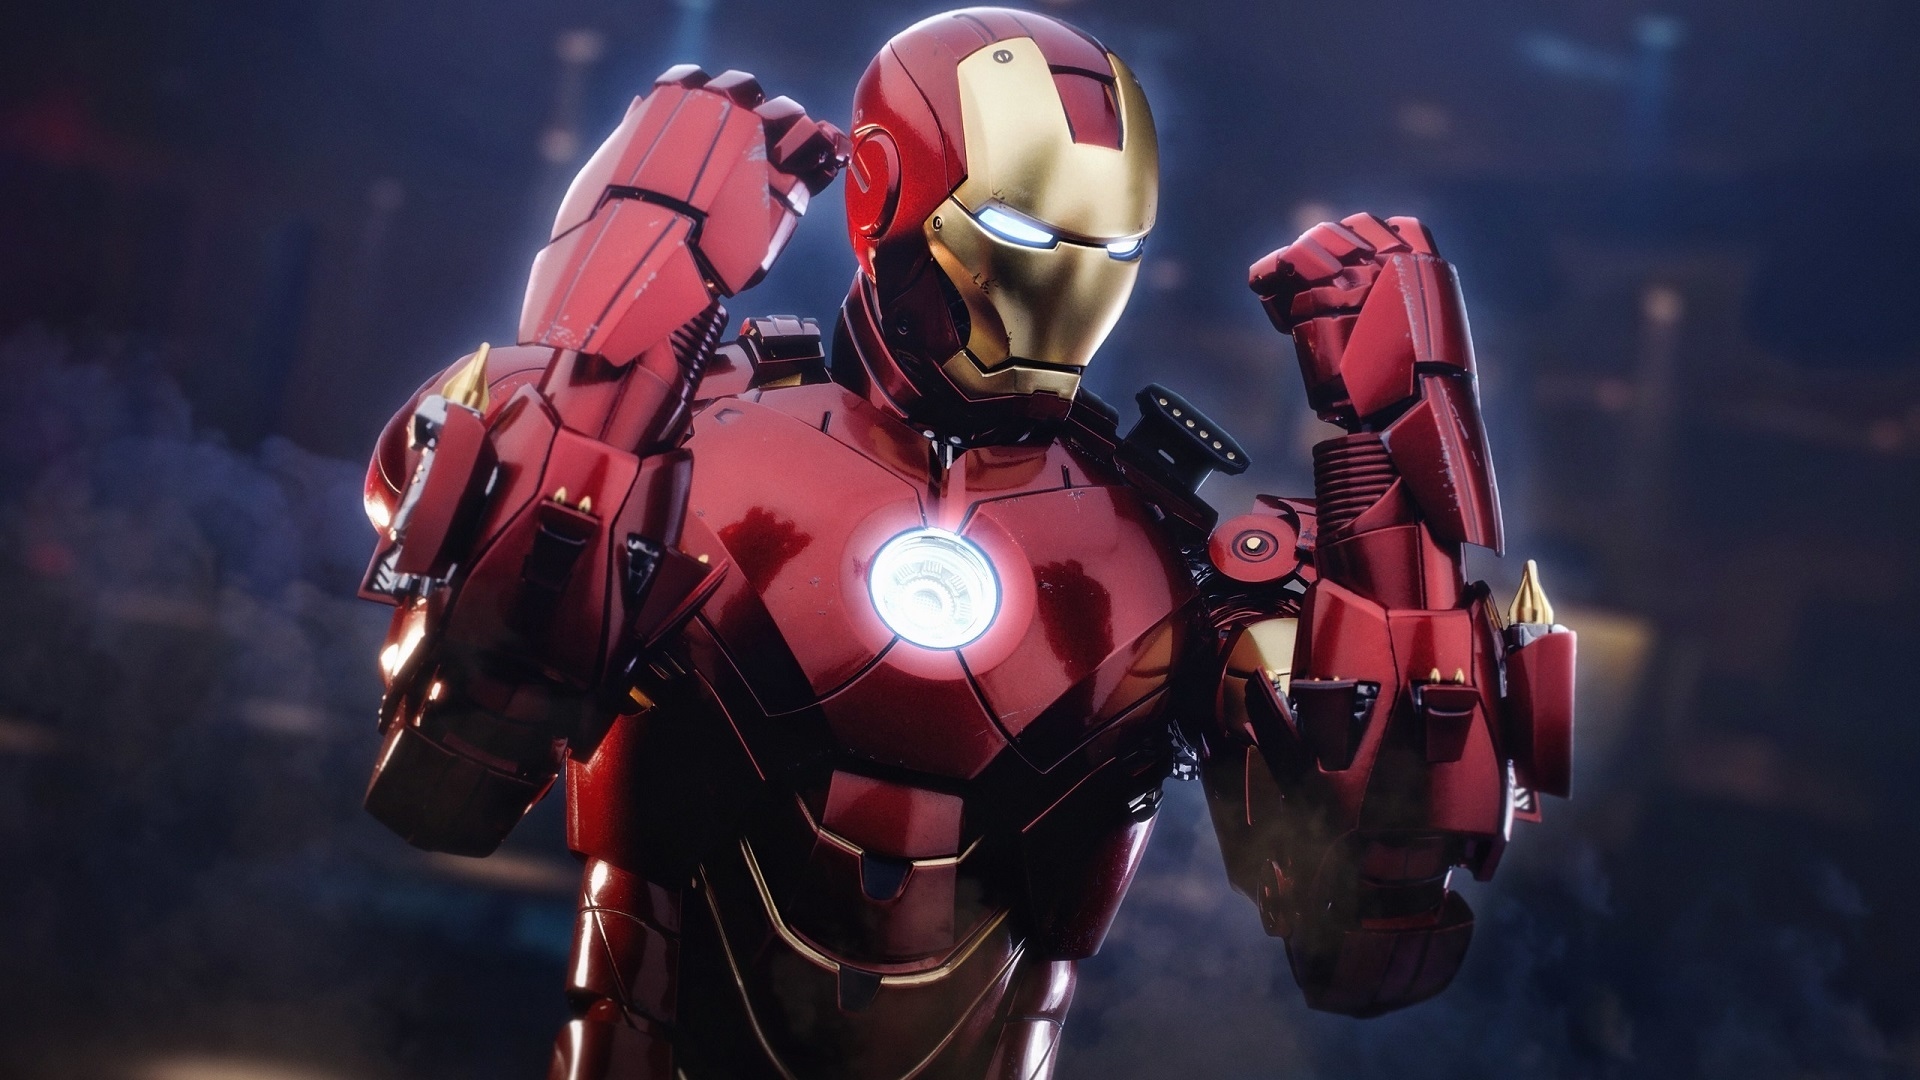 Iron Man Wallpaper Pictures | Download Free Images on Unsplash